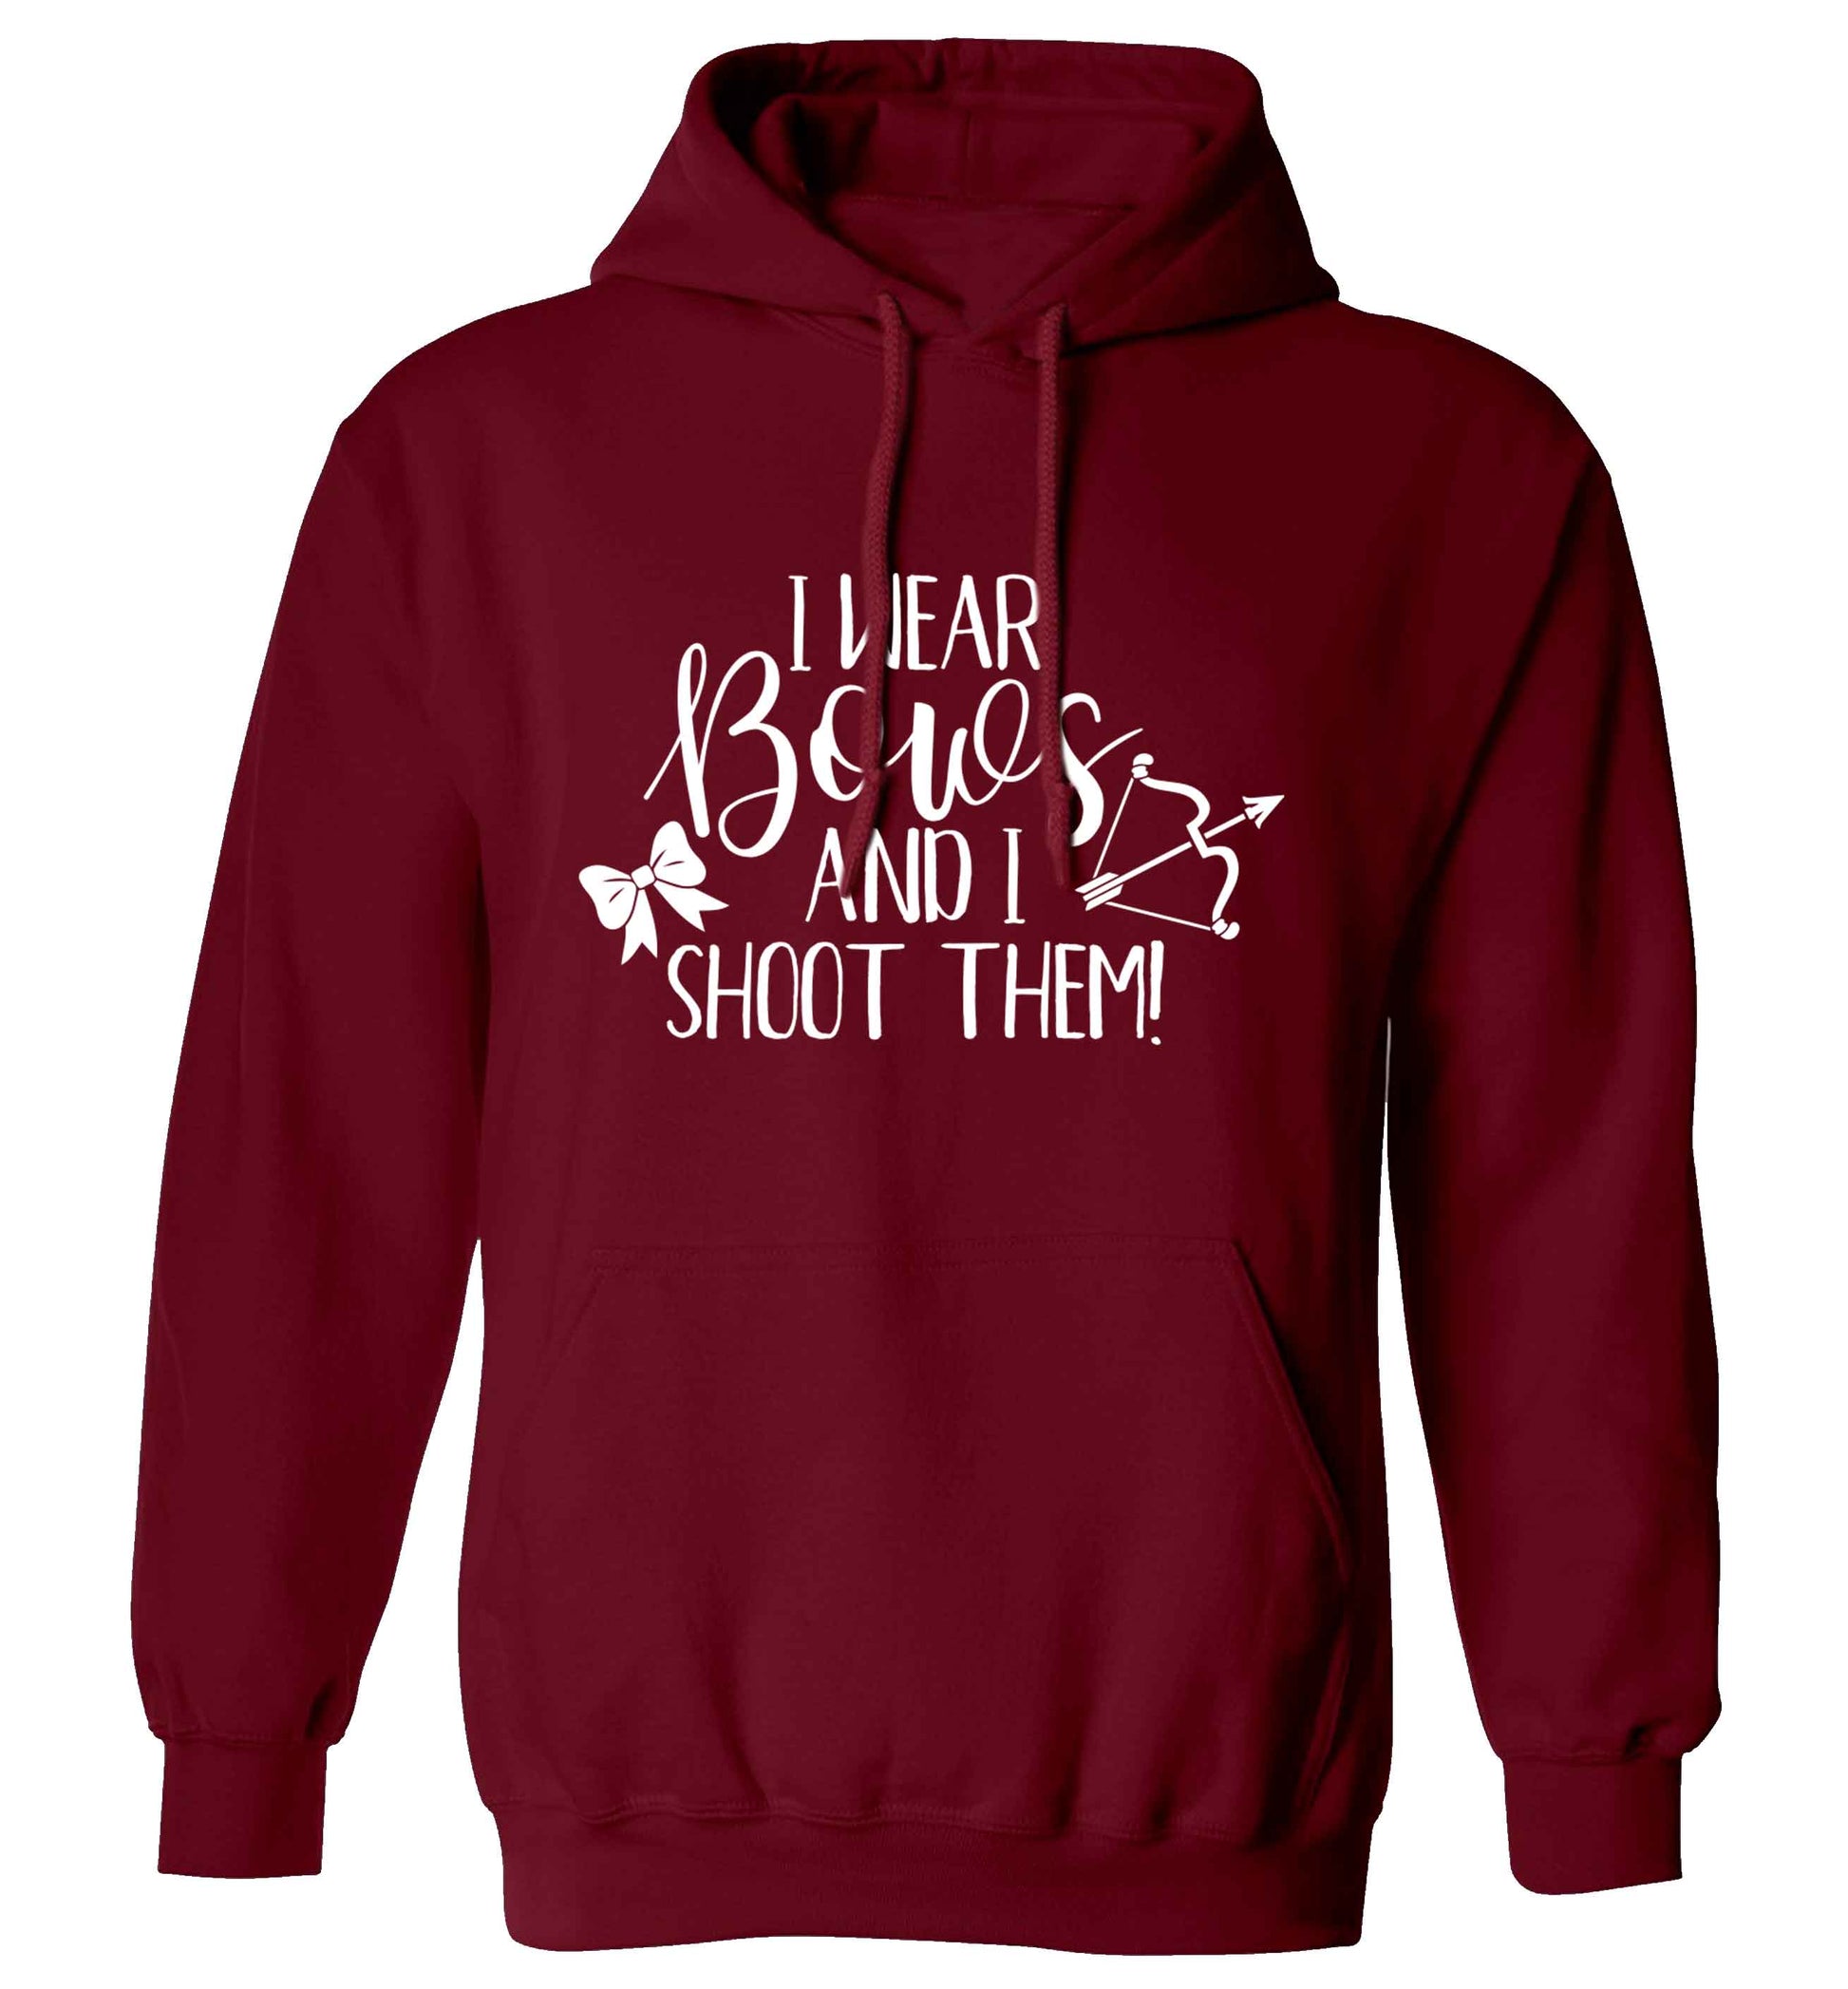 I wear bows and I shoot them adults unisex maroon hoodie 2XL